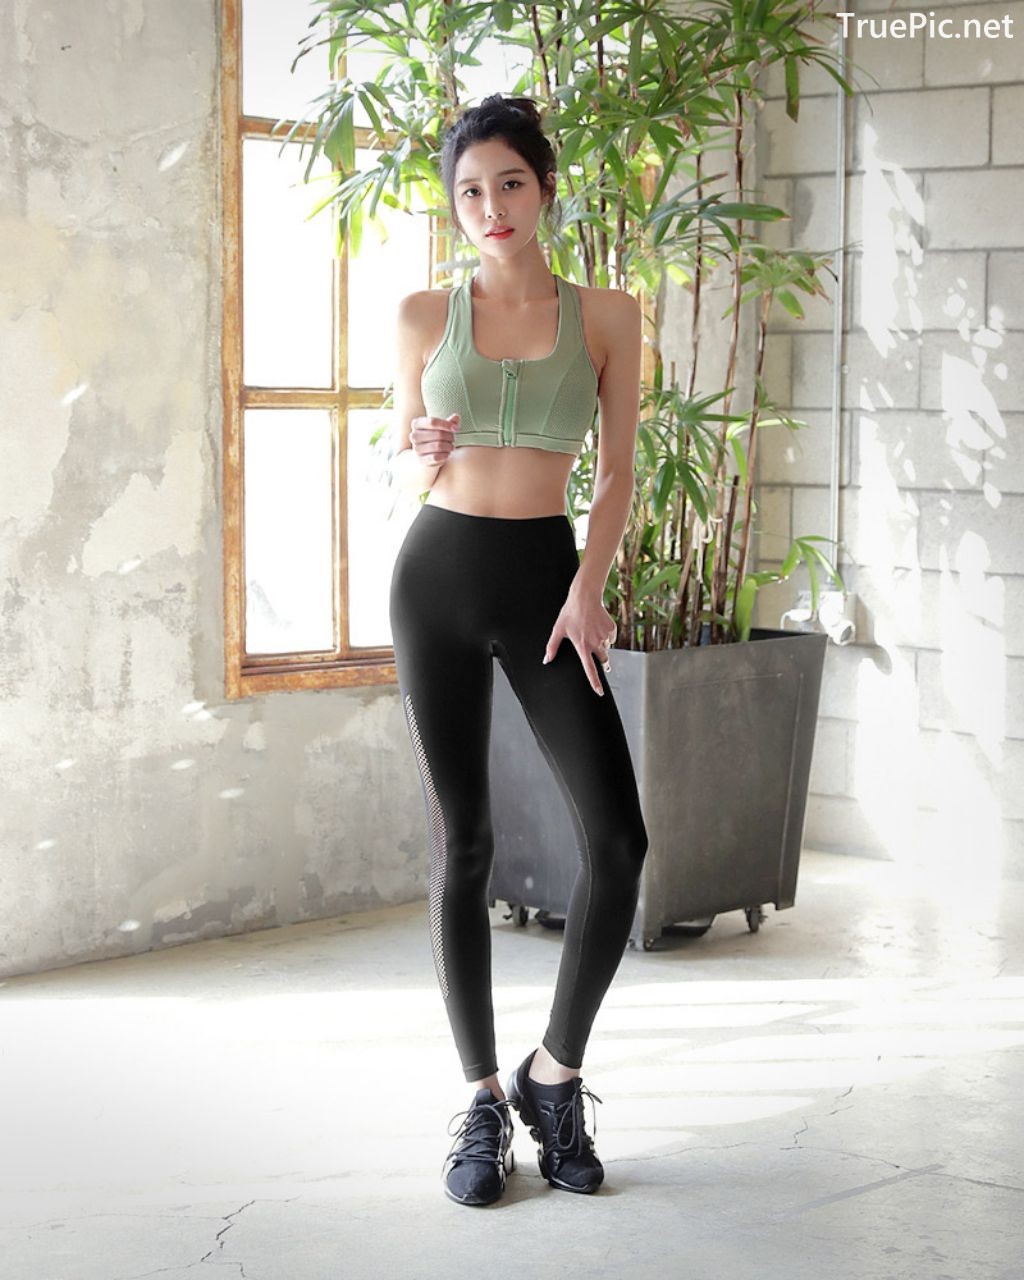 Image-Korean-Fashion-Model-Ju-Woo-Fitness-Set-Collection-TruePic.net- Picture-91